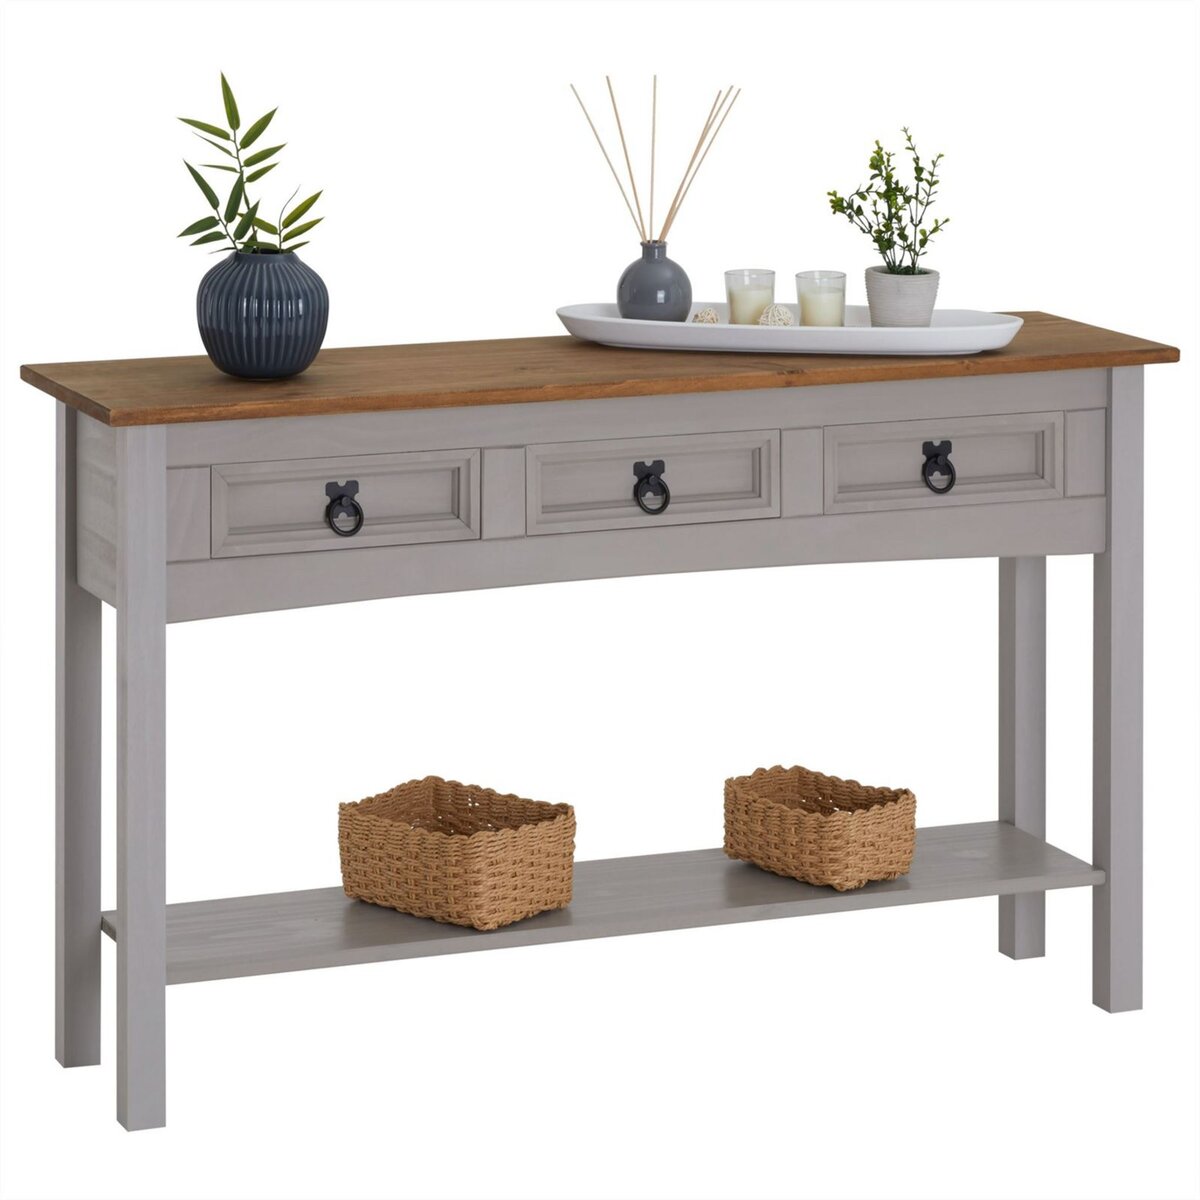 IDIMEX Table console RURAL table d'appoint en pin massif blanc